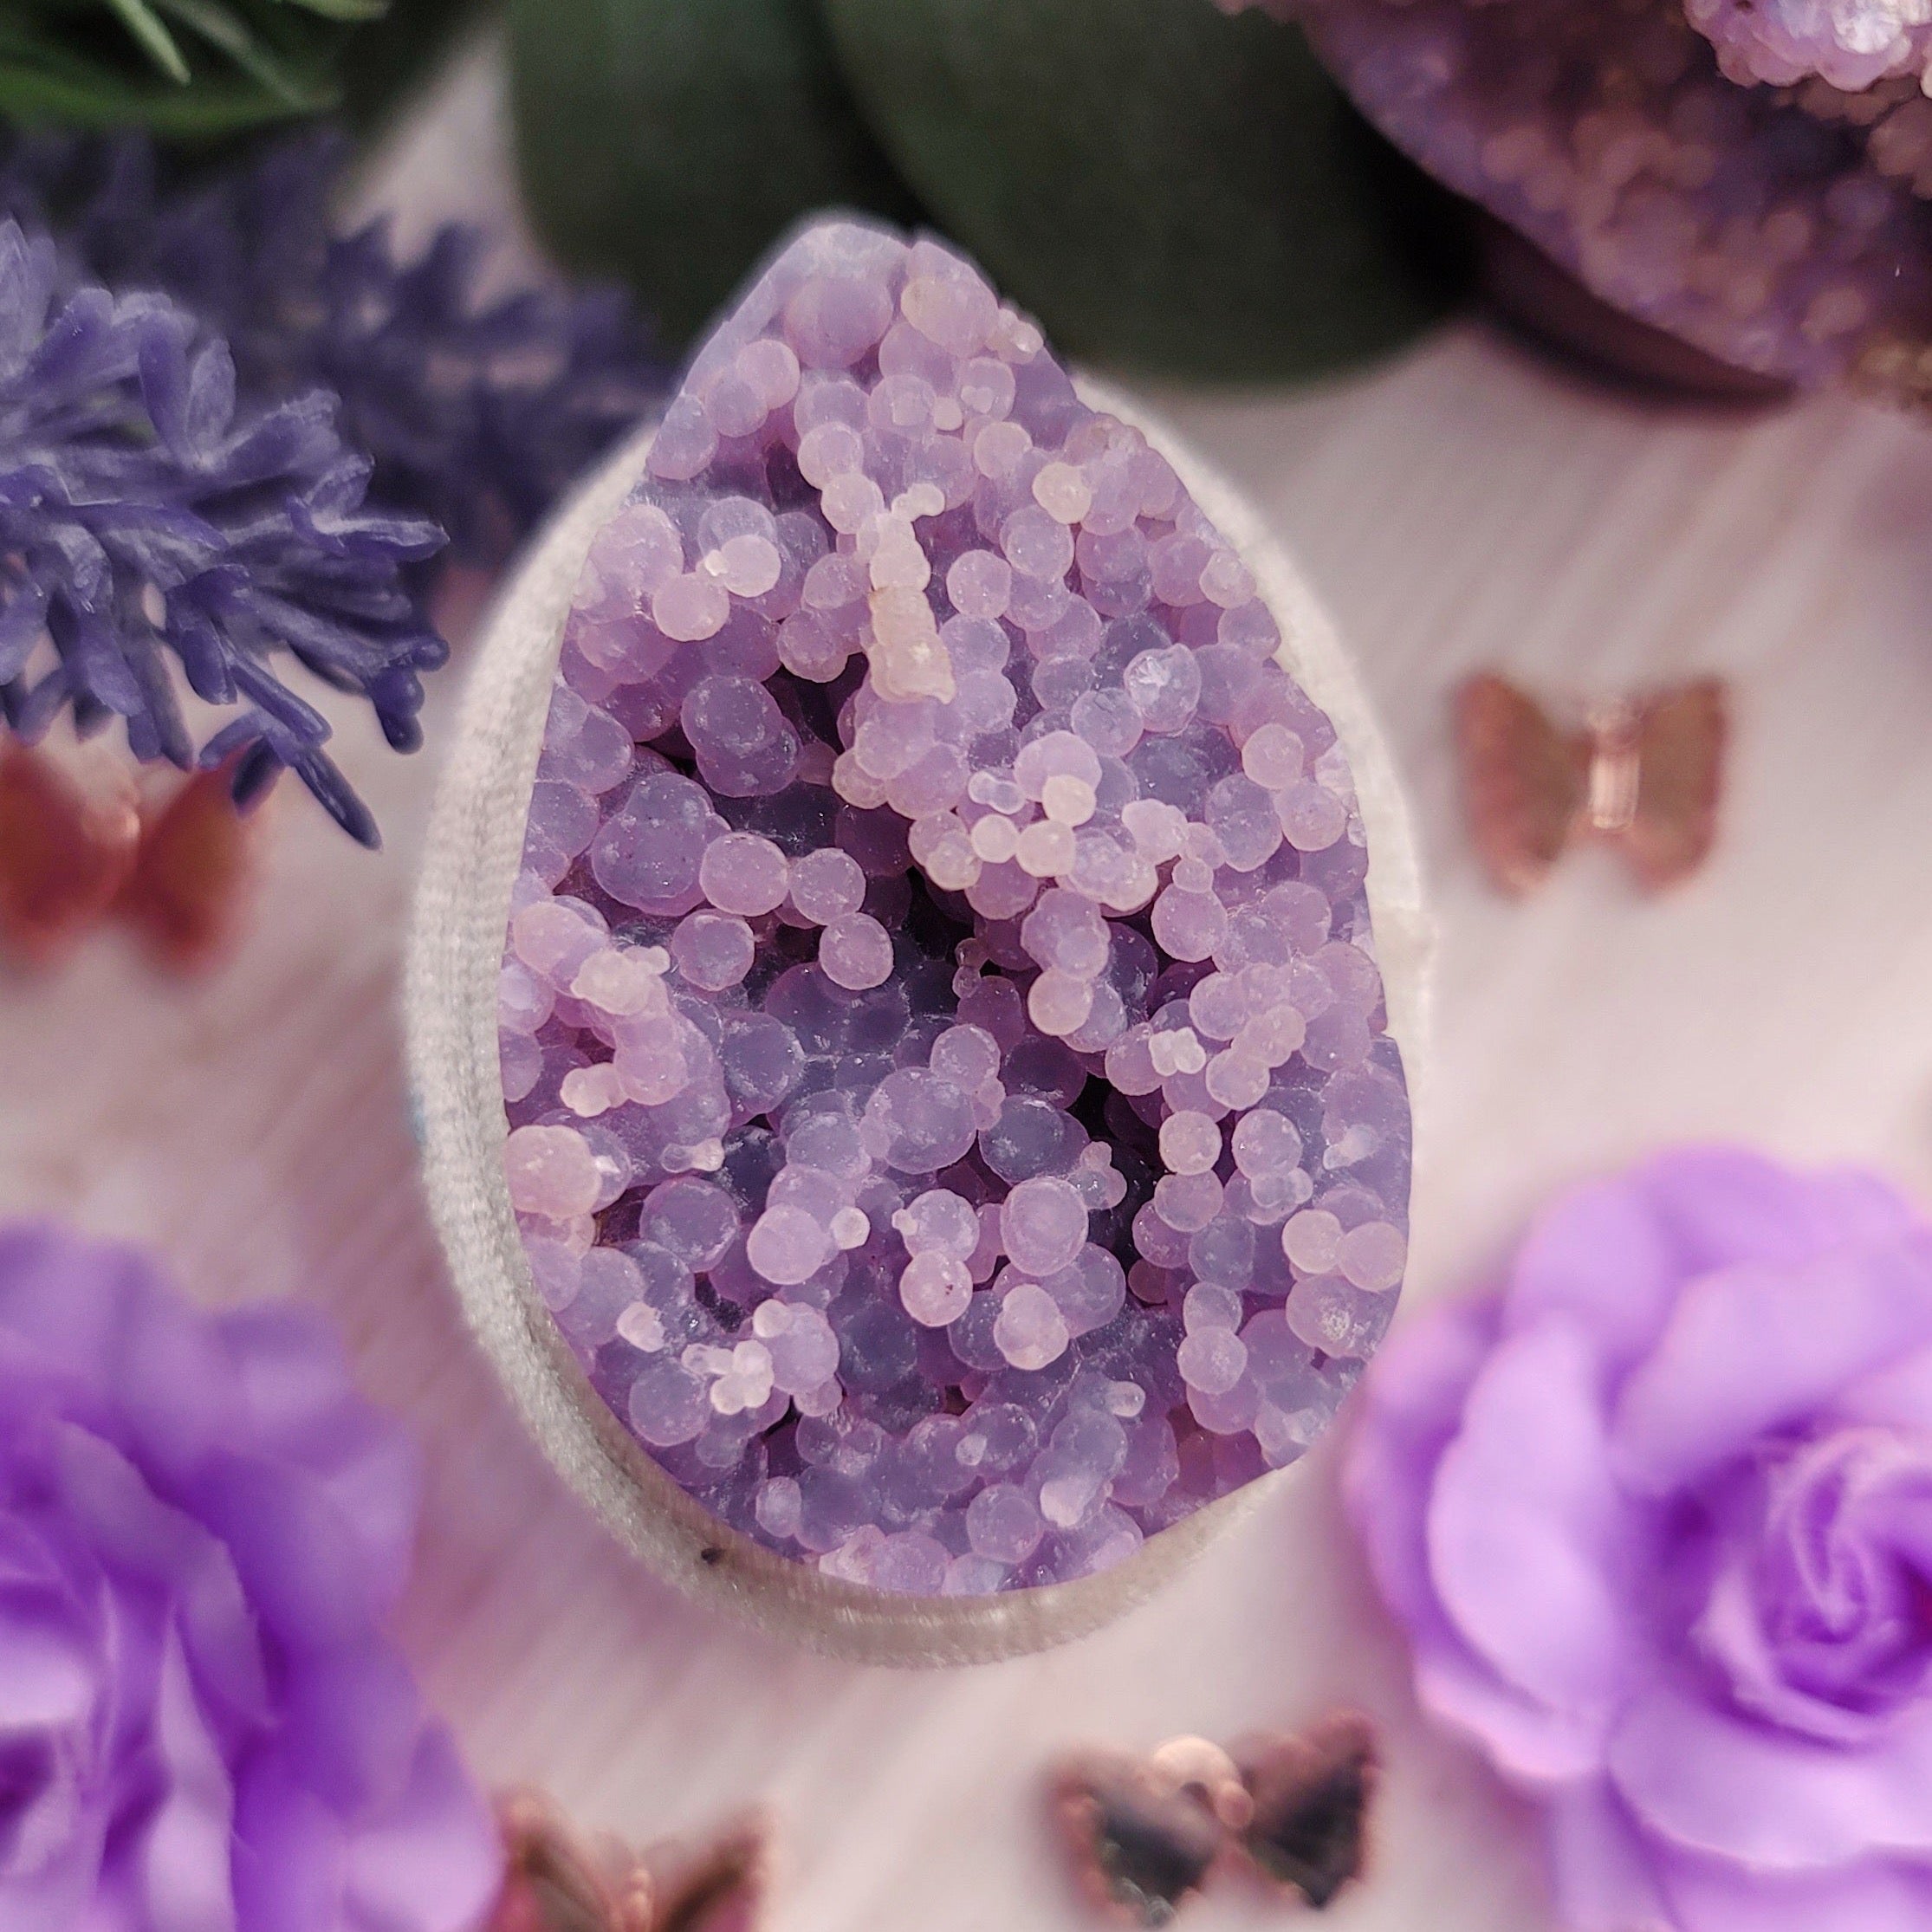 Grape Agate Necklace for Connecting with your Higher Self and Attracting your Soul Mate